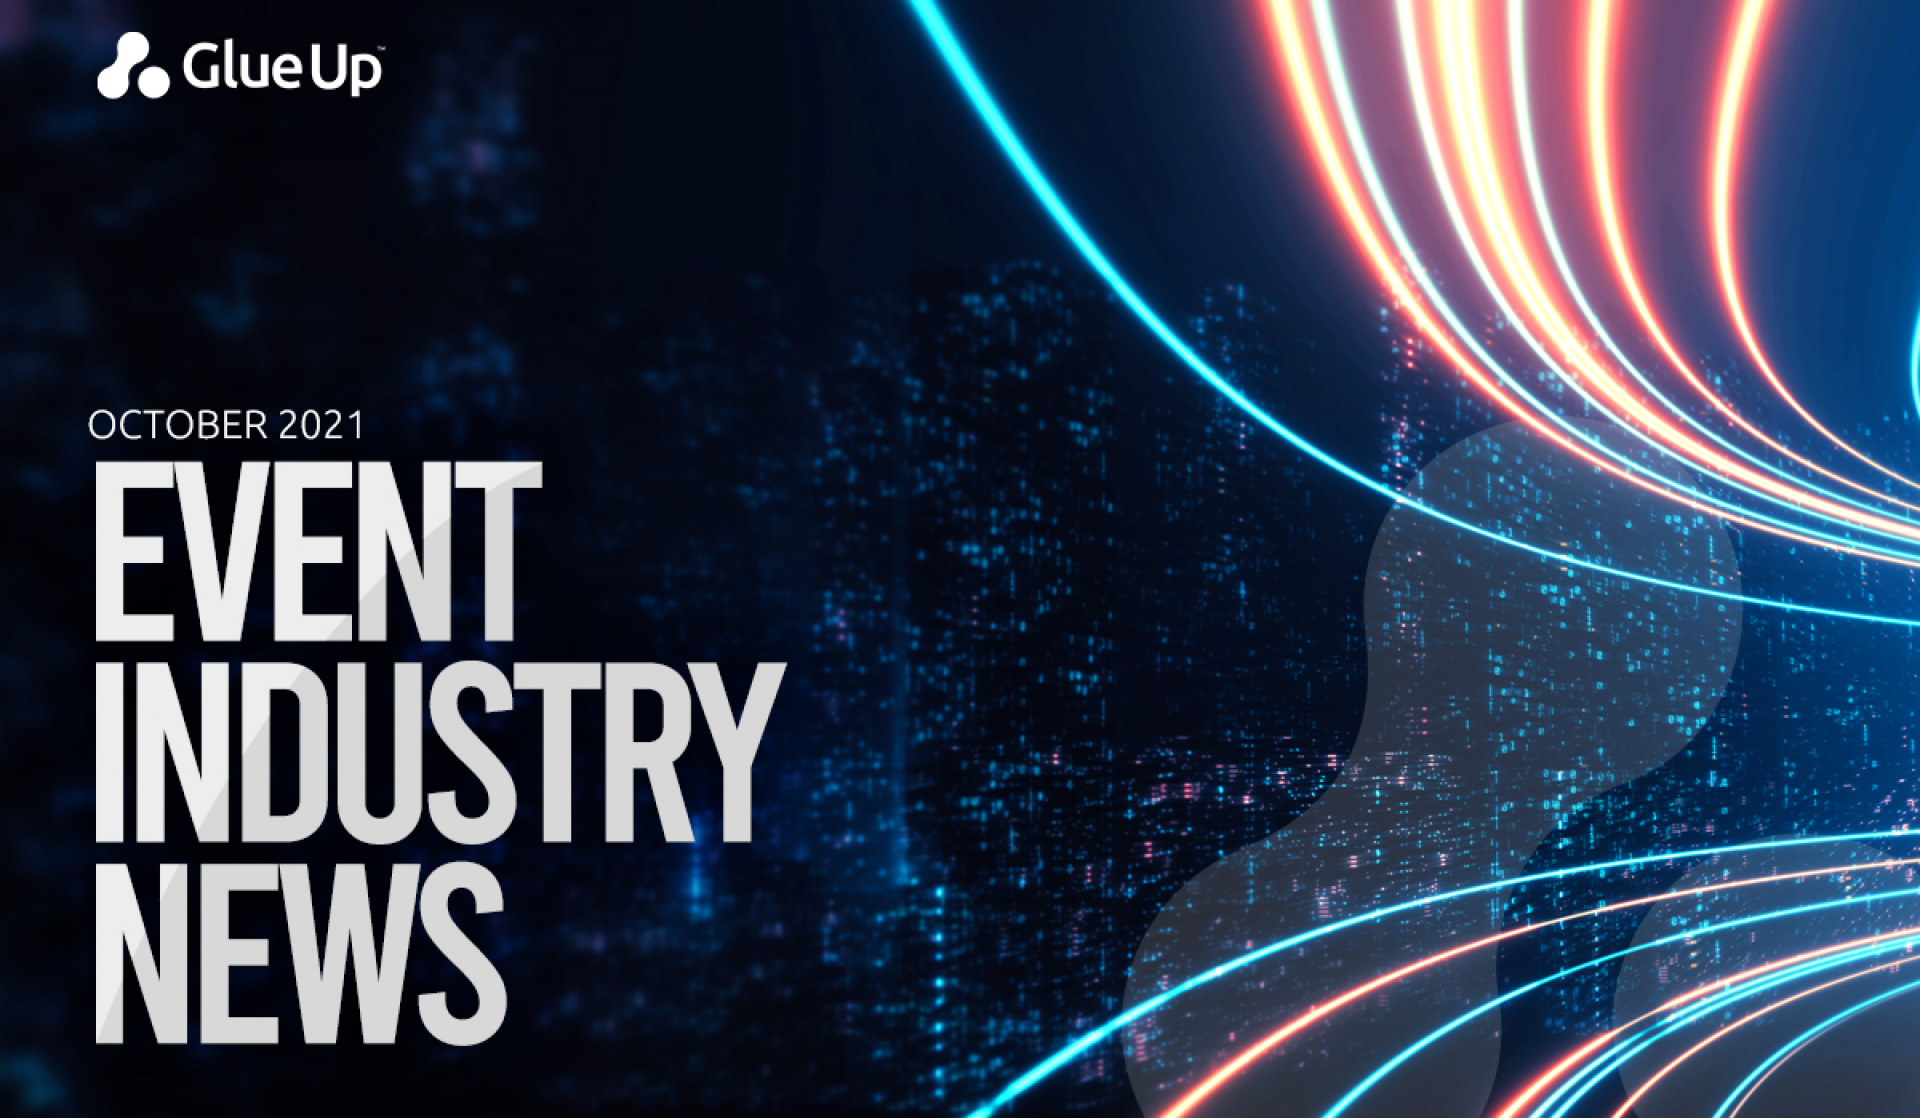 Latest and Biggest Event Industry News for October 2021